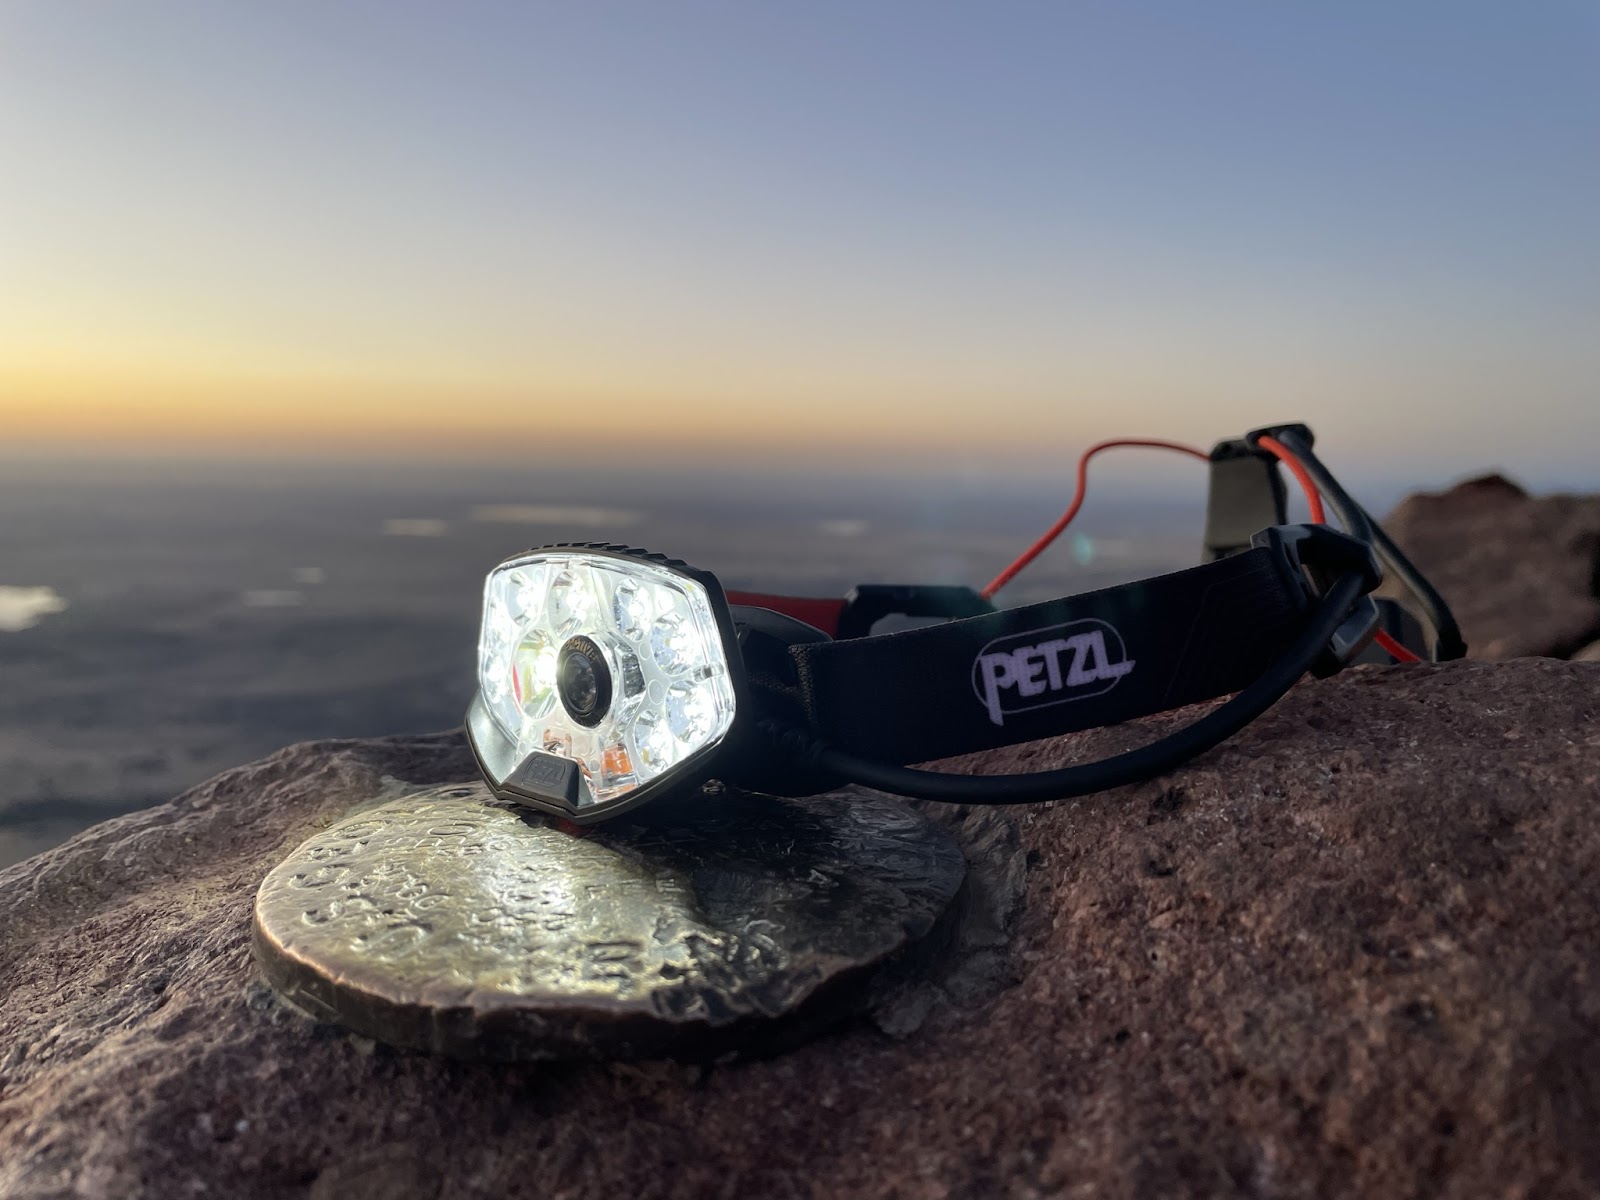 Trail Run: Petzl Nao RL Headlamp Review - Lighter, Less Expensive and Double the Lumens, Yes Please!!